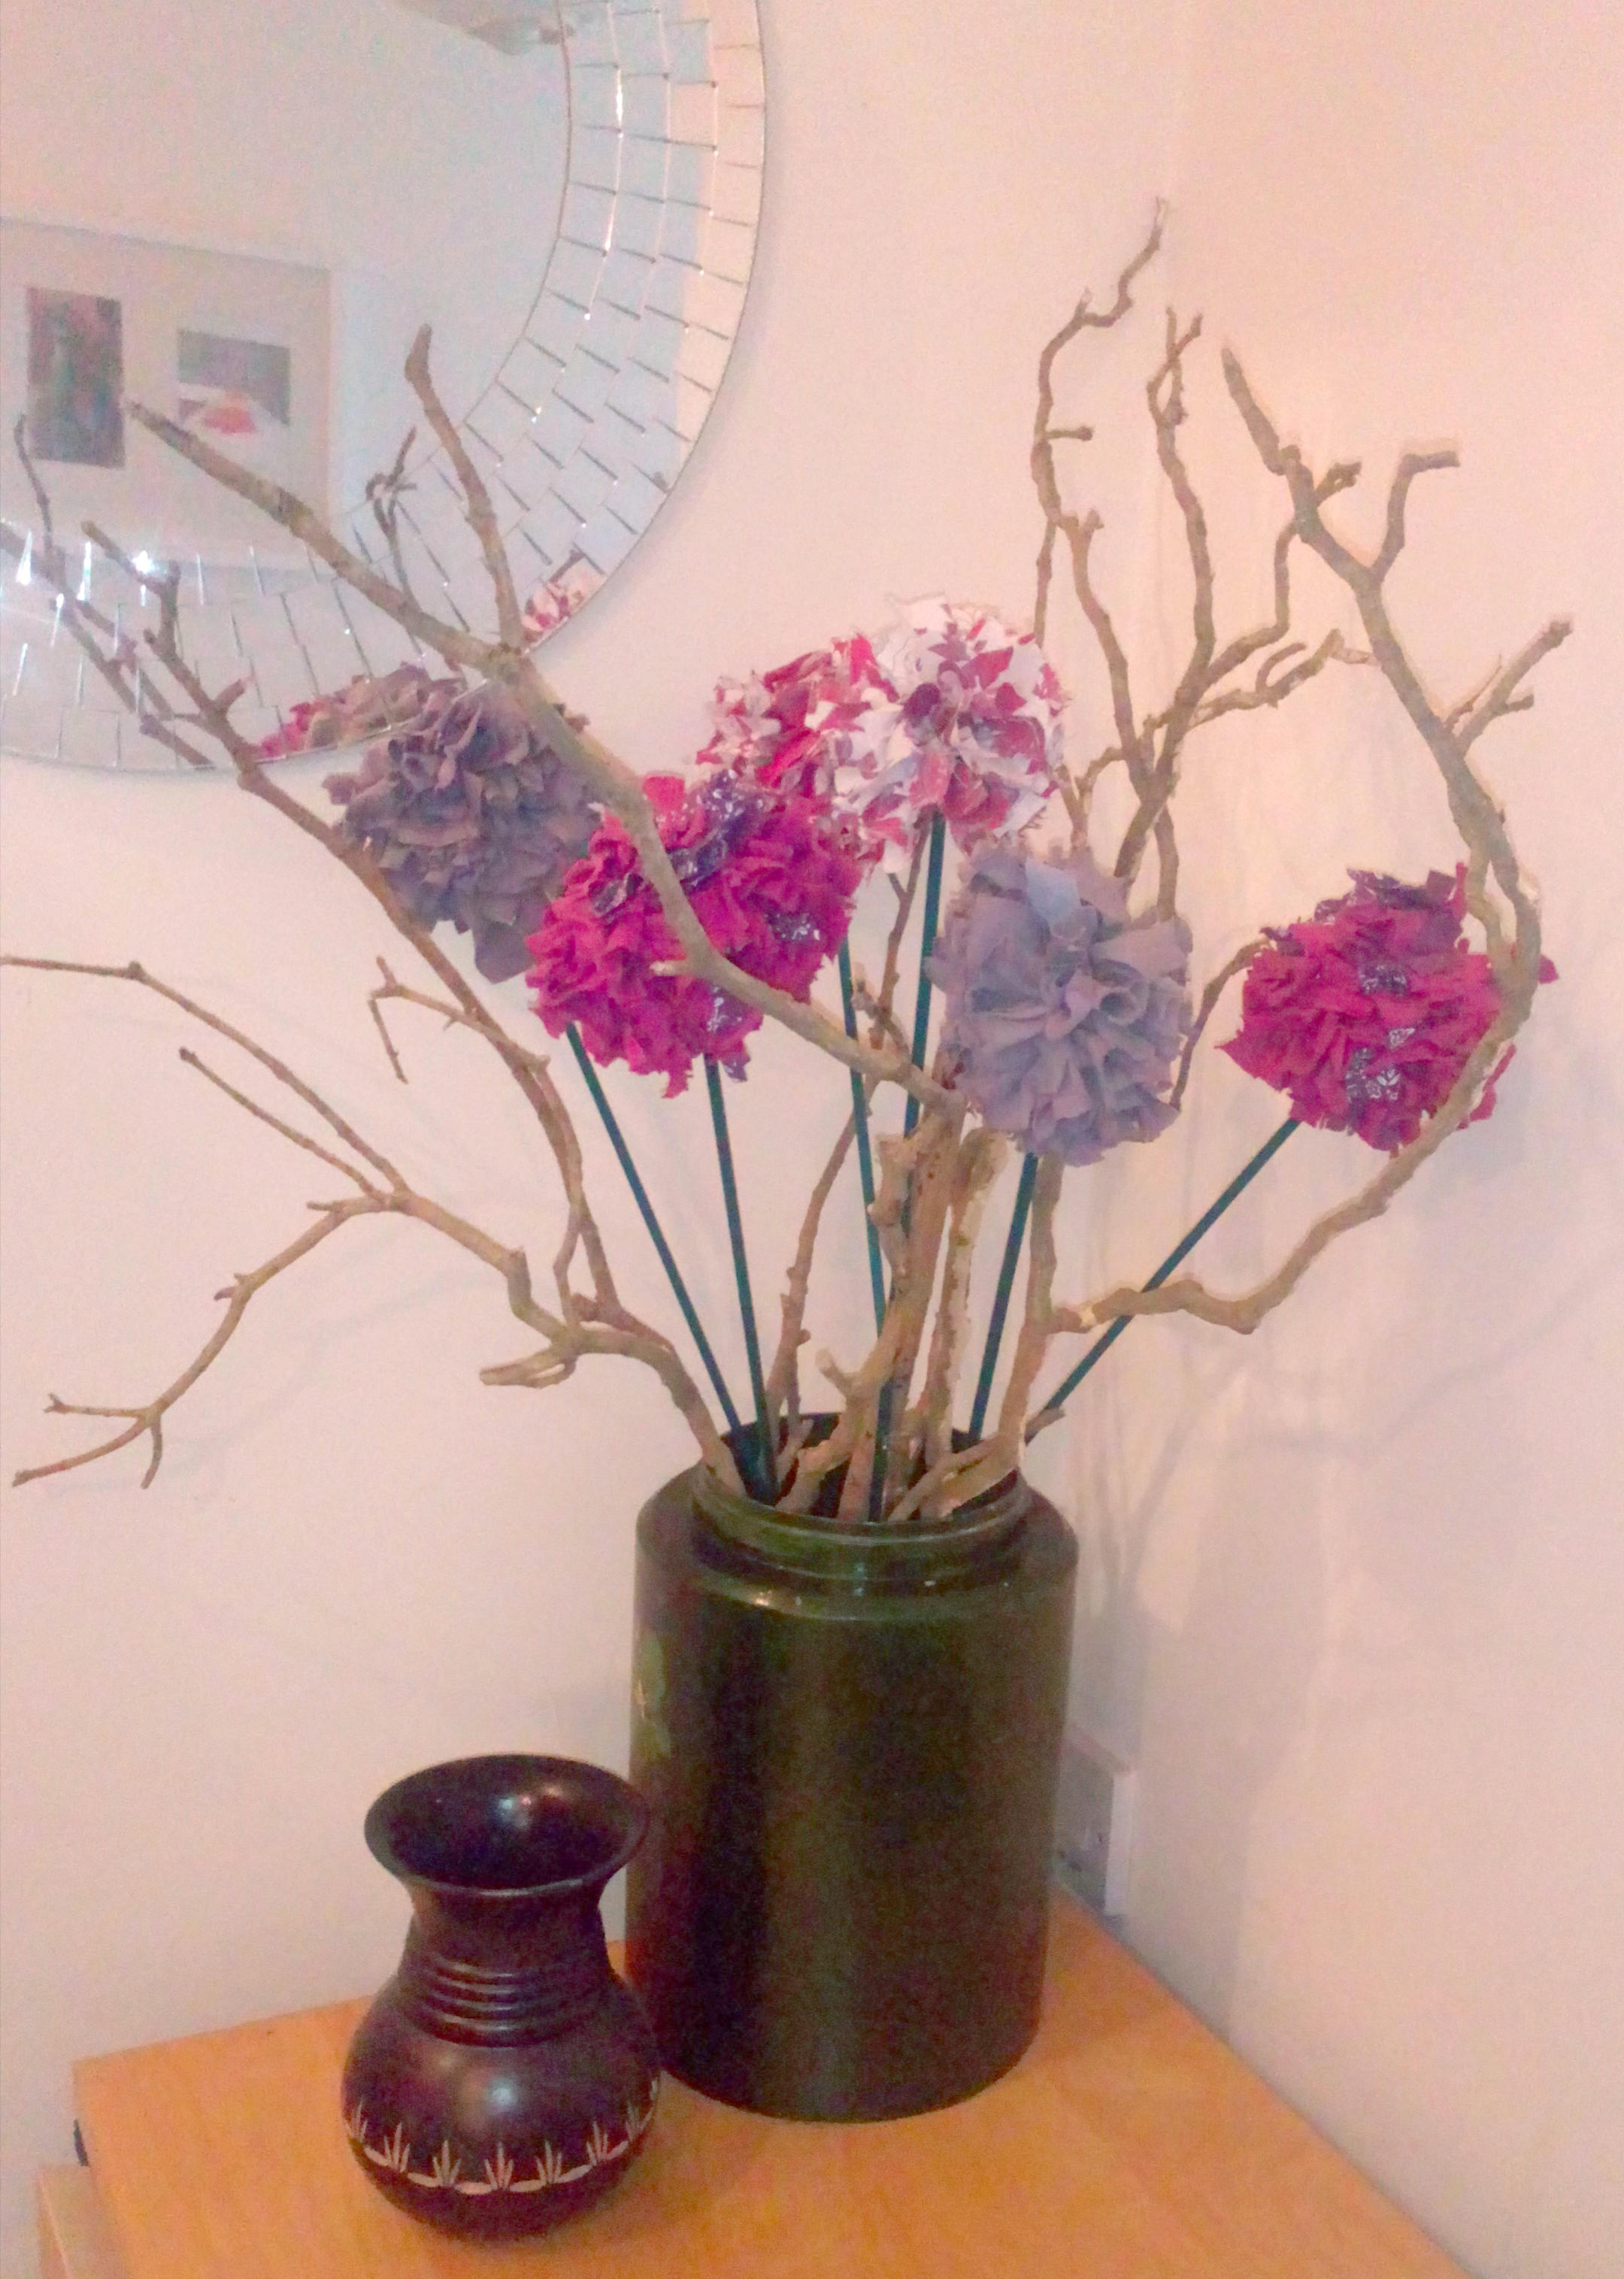 Pink fabric flowers in a green vase with wooden twigs